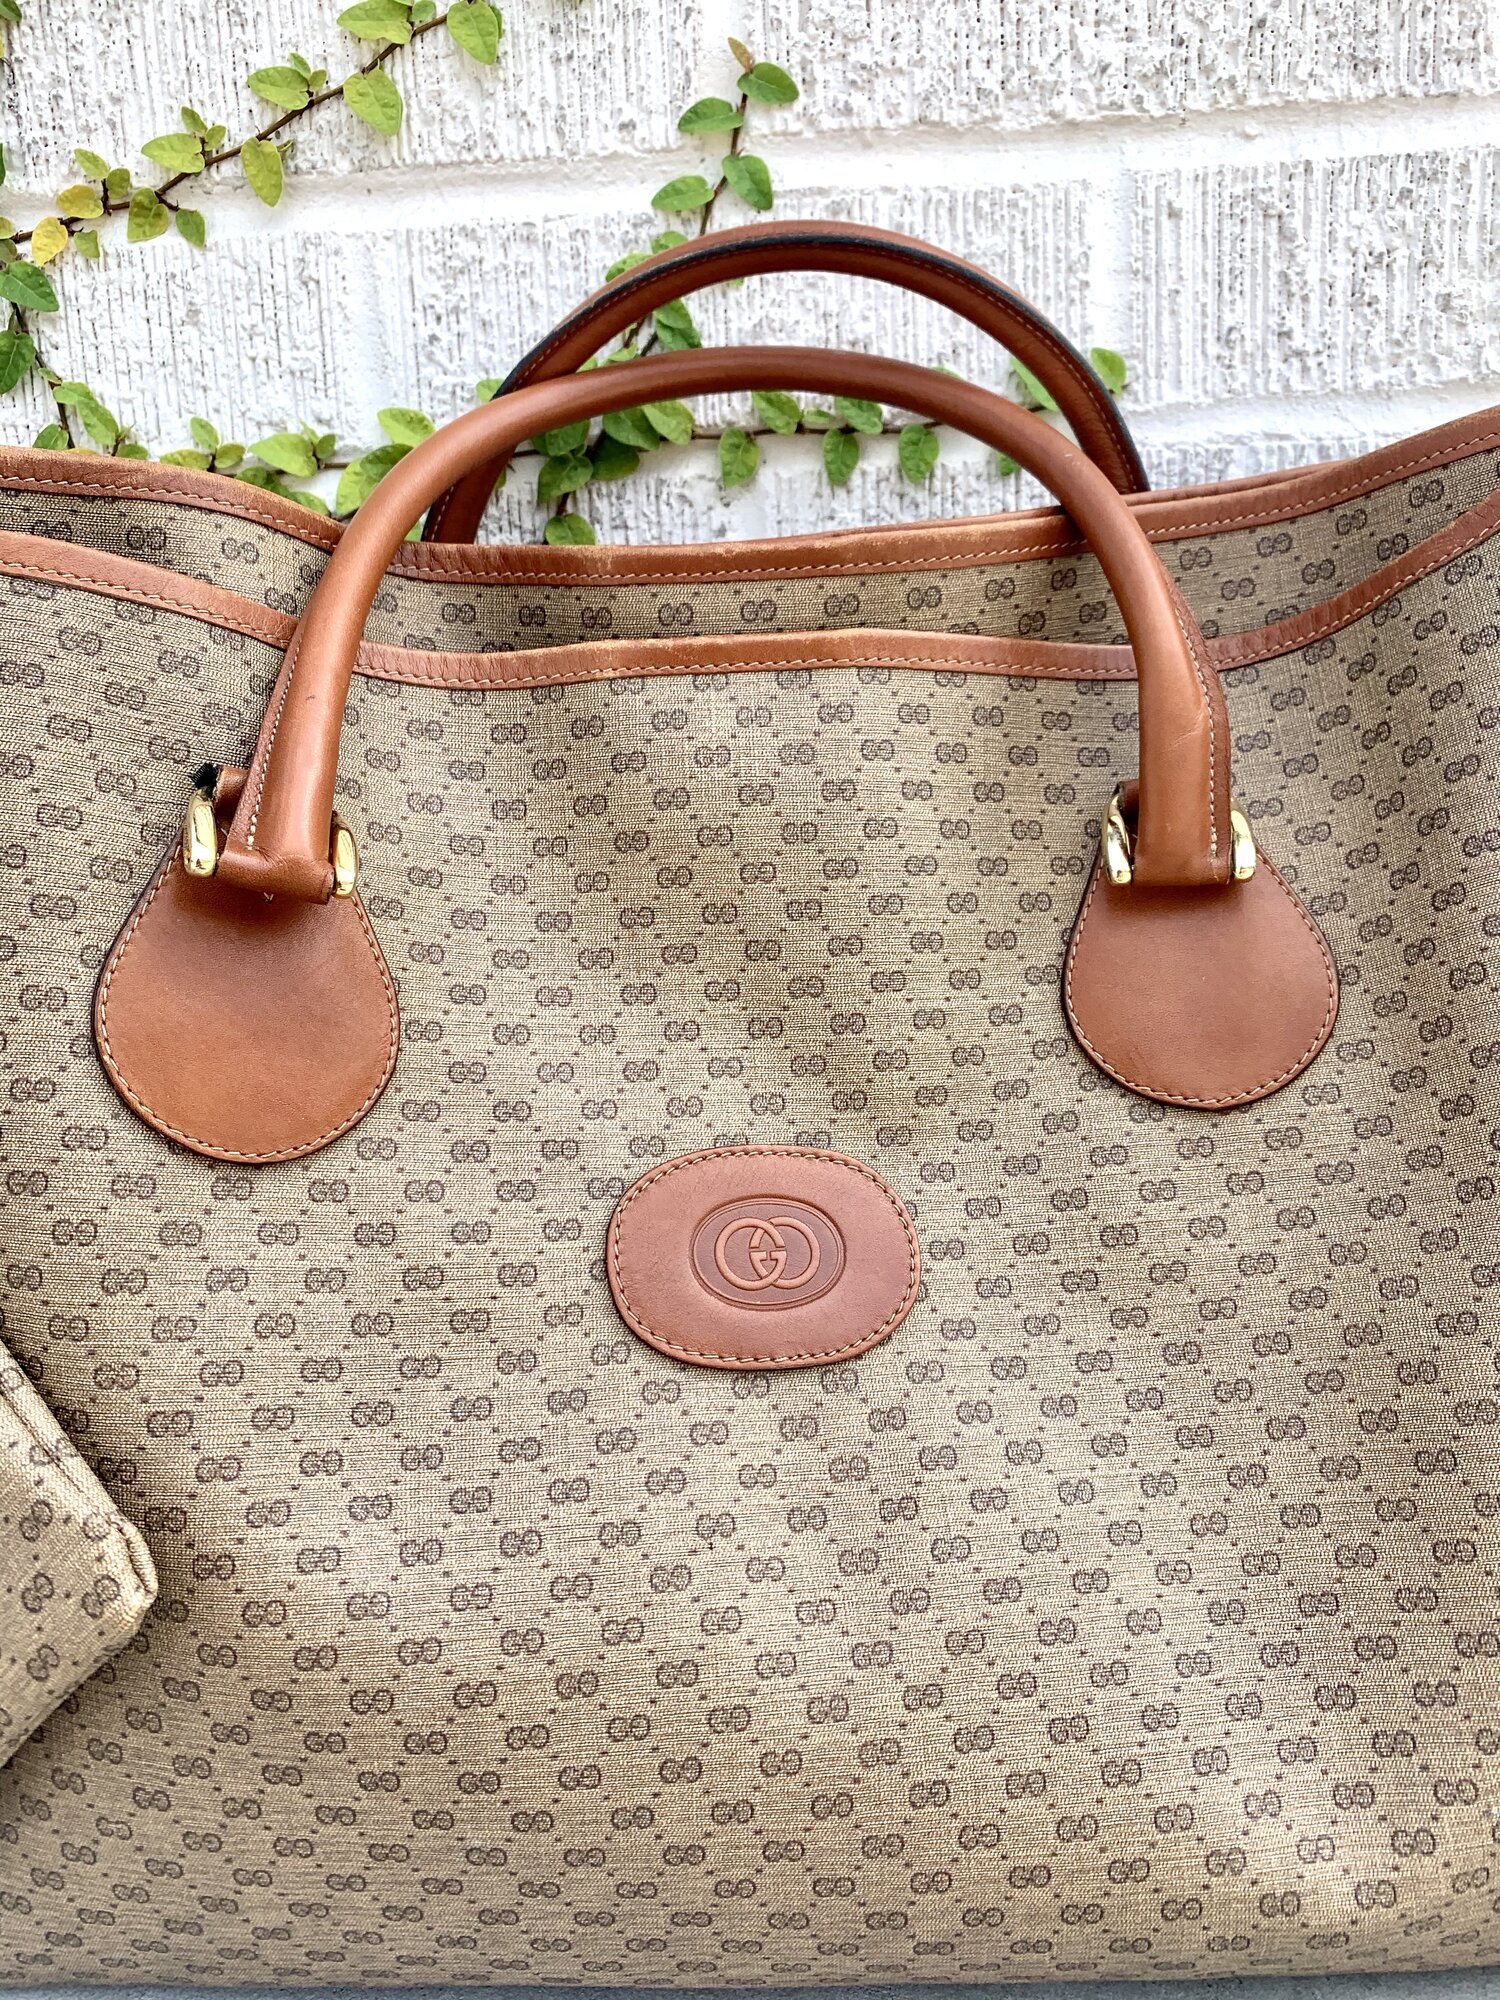 This vintage Gucci bag I found at the thrift for $80. Cleaned it